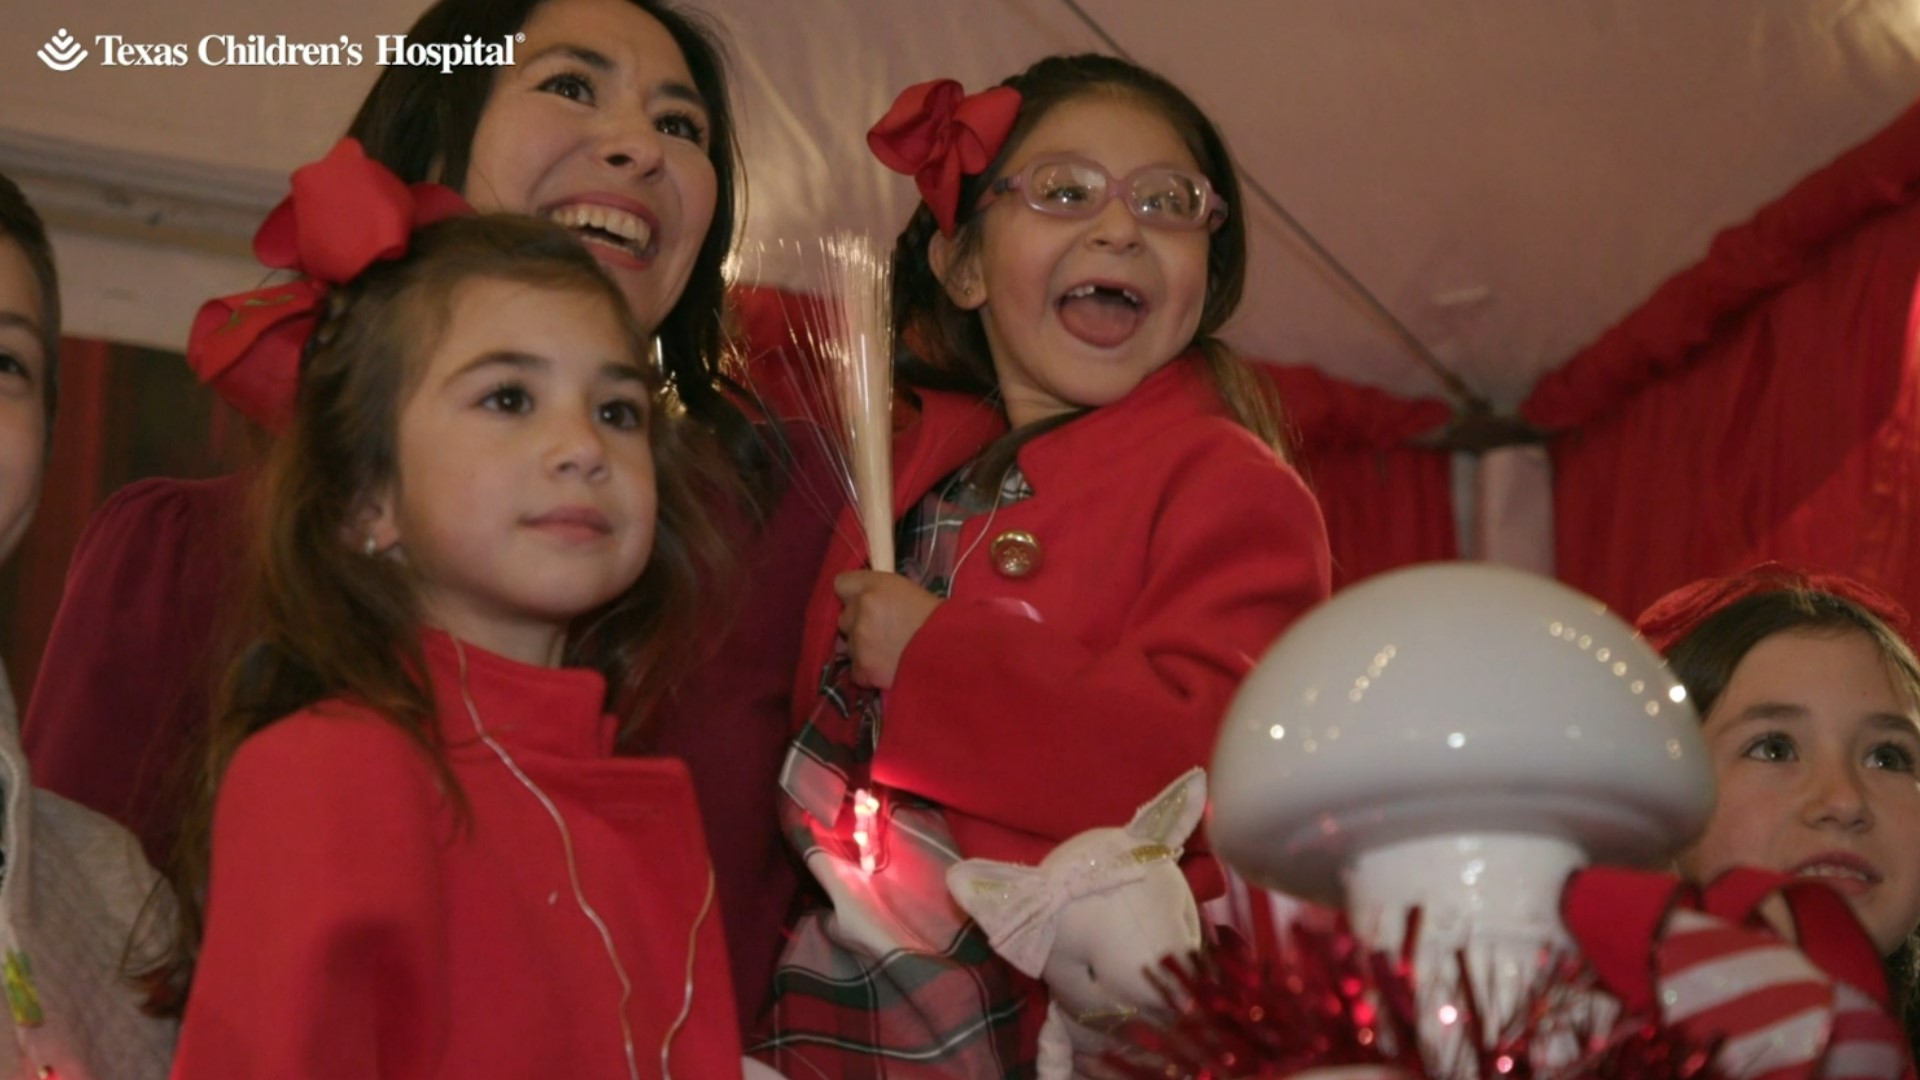 The annual tree lighting in The Woodlands is always a holiday highlight. But this year's ceremony was extra special because of the little girl chosen to light it.